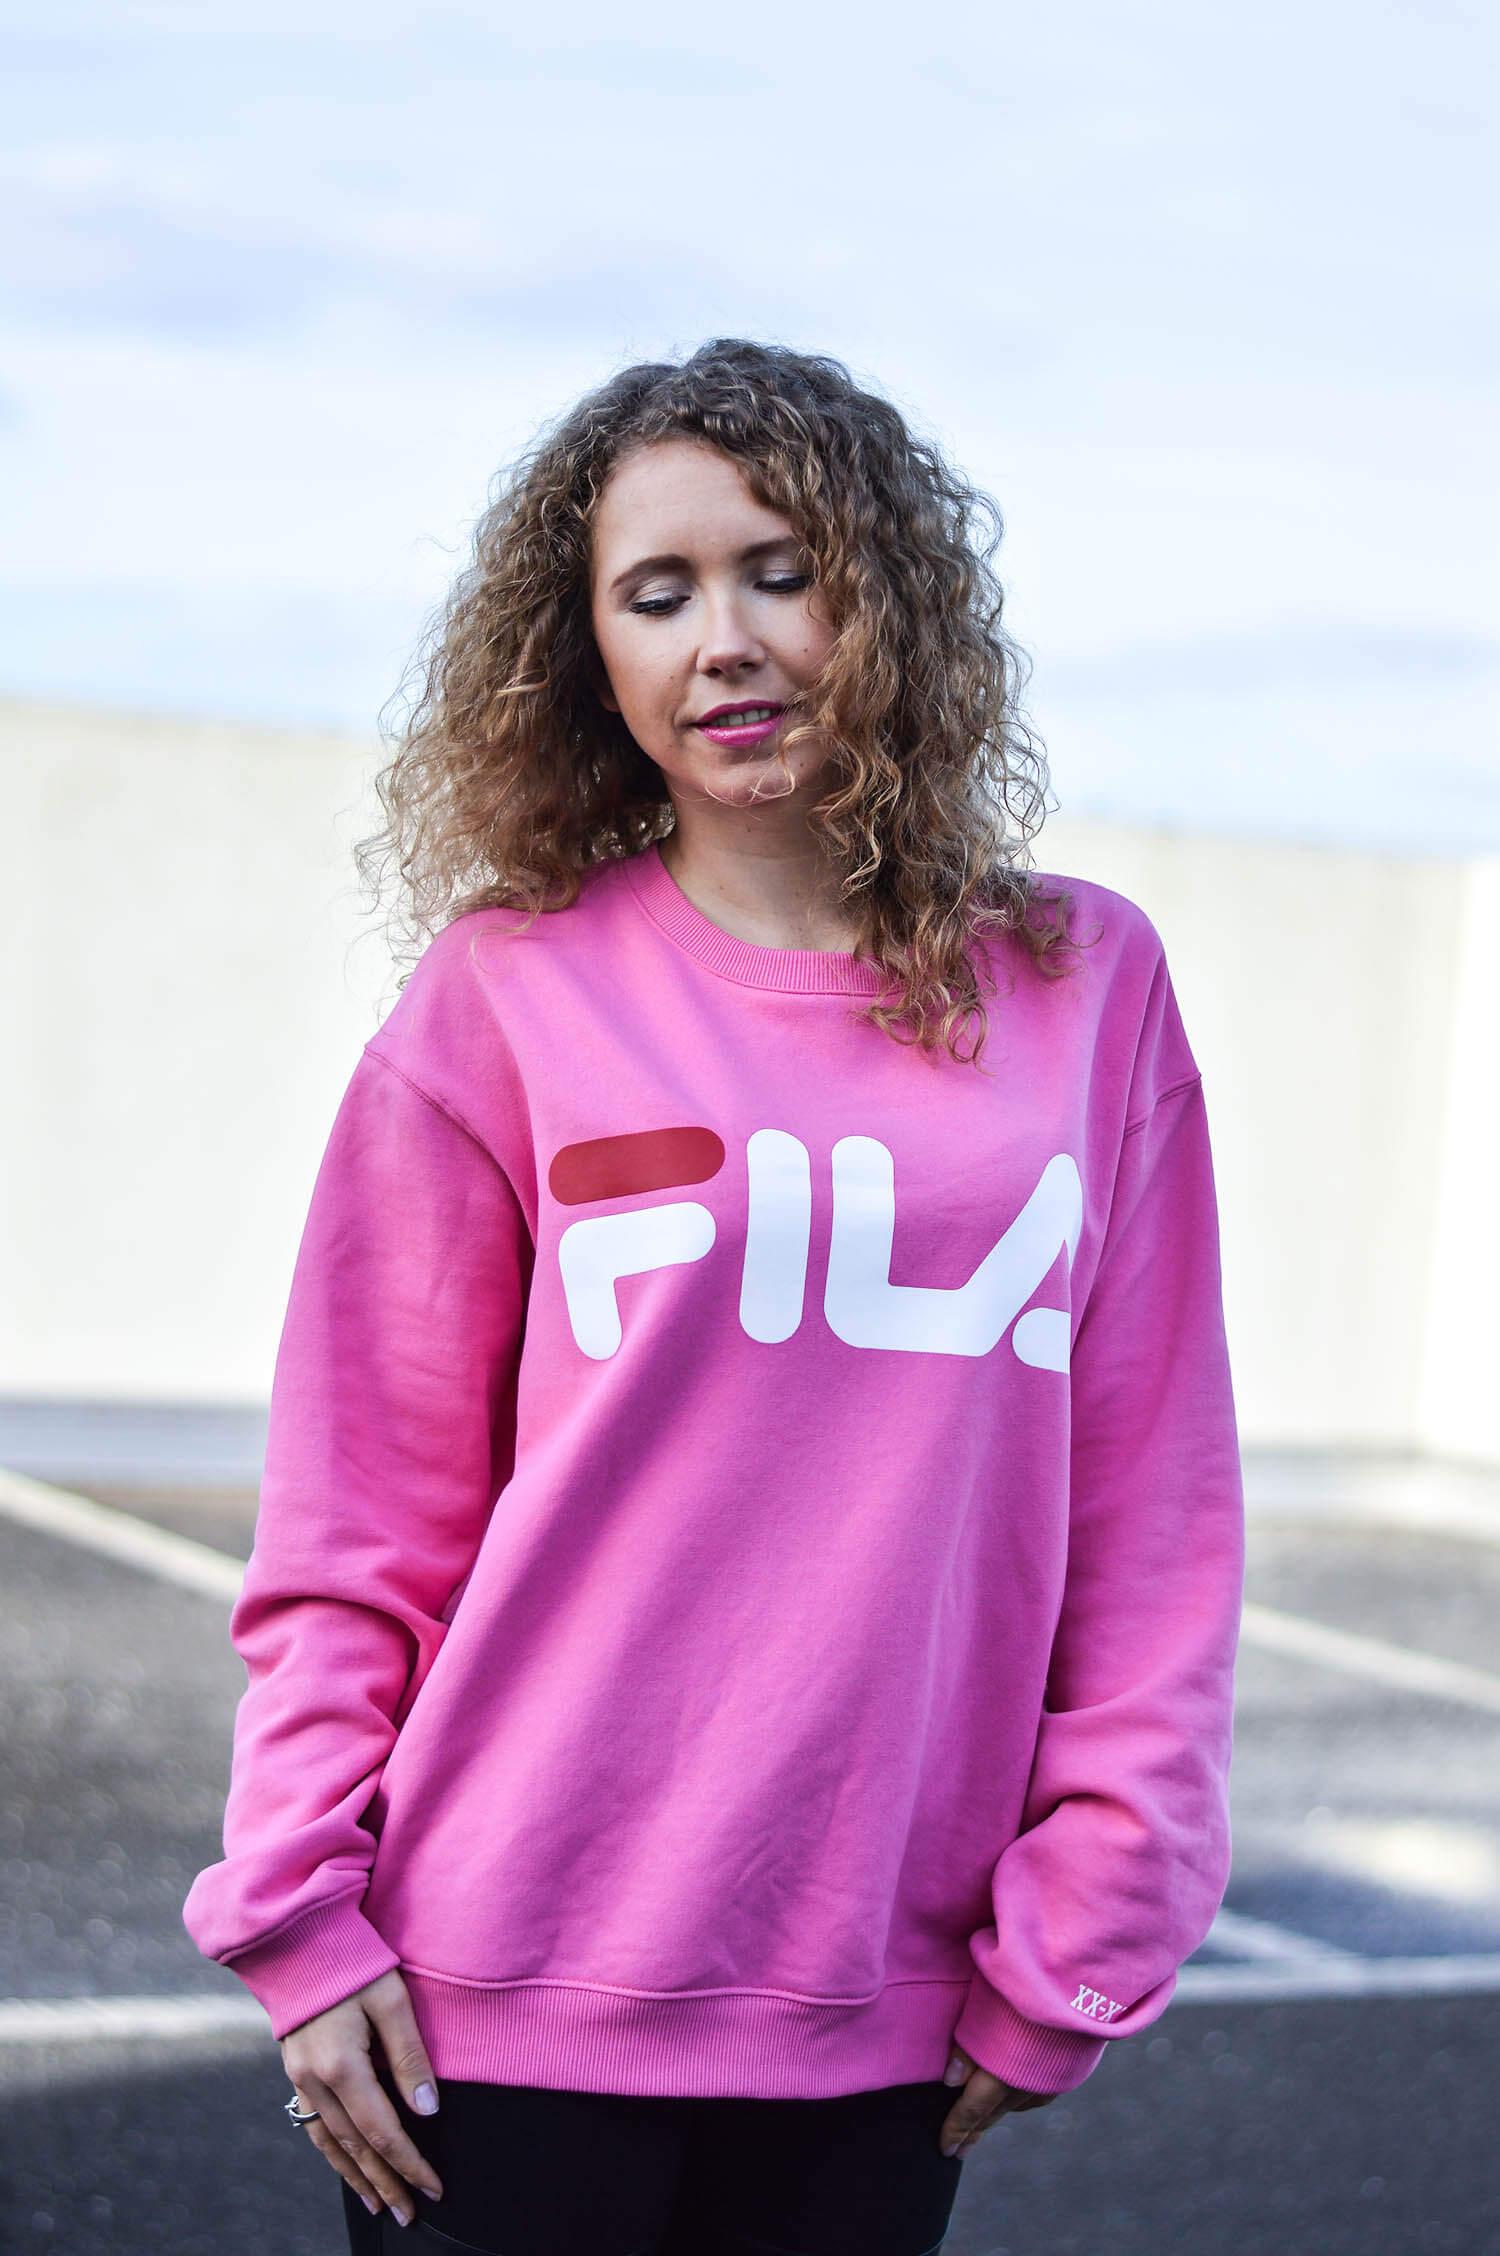 Kationette-Fashionblog-NRW-Outfit-Pink-Fila-Sweater-Leather-Leggings-HighHeel-Booties-streetstyle-curls